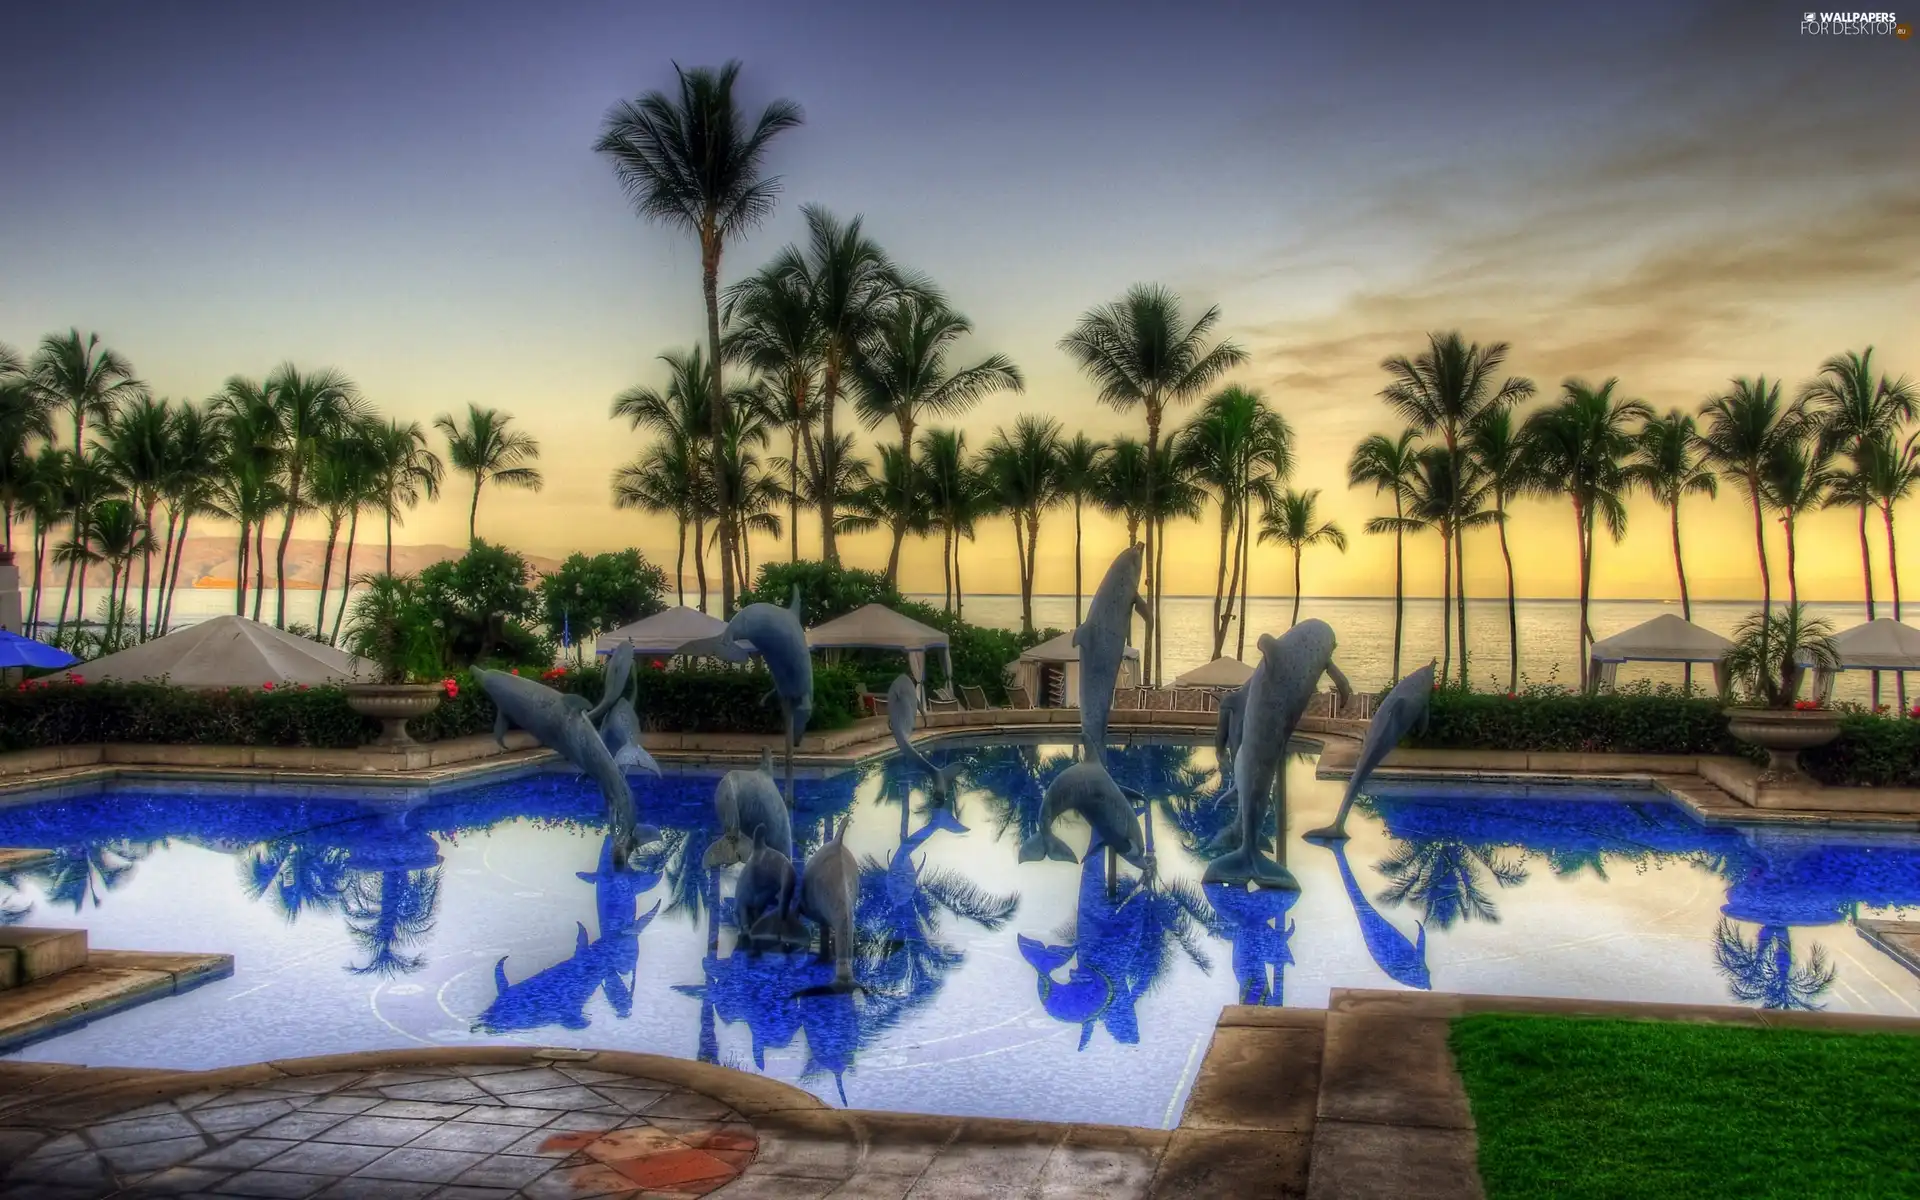 Pool, Palms, dolphins